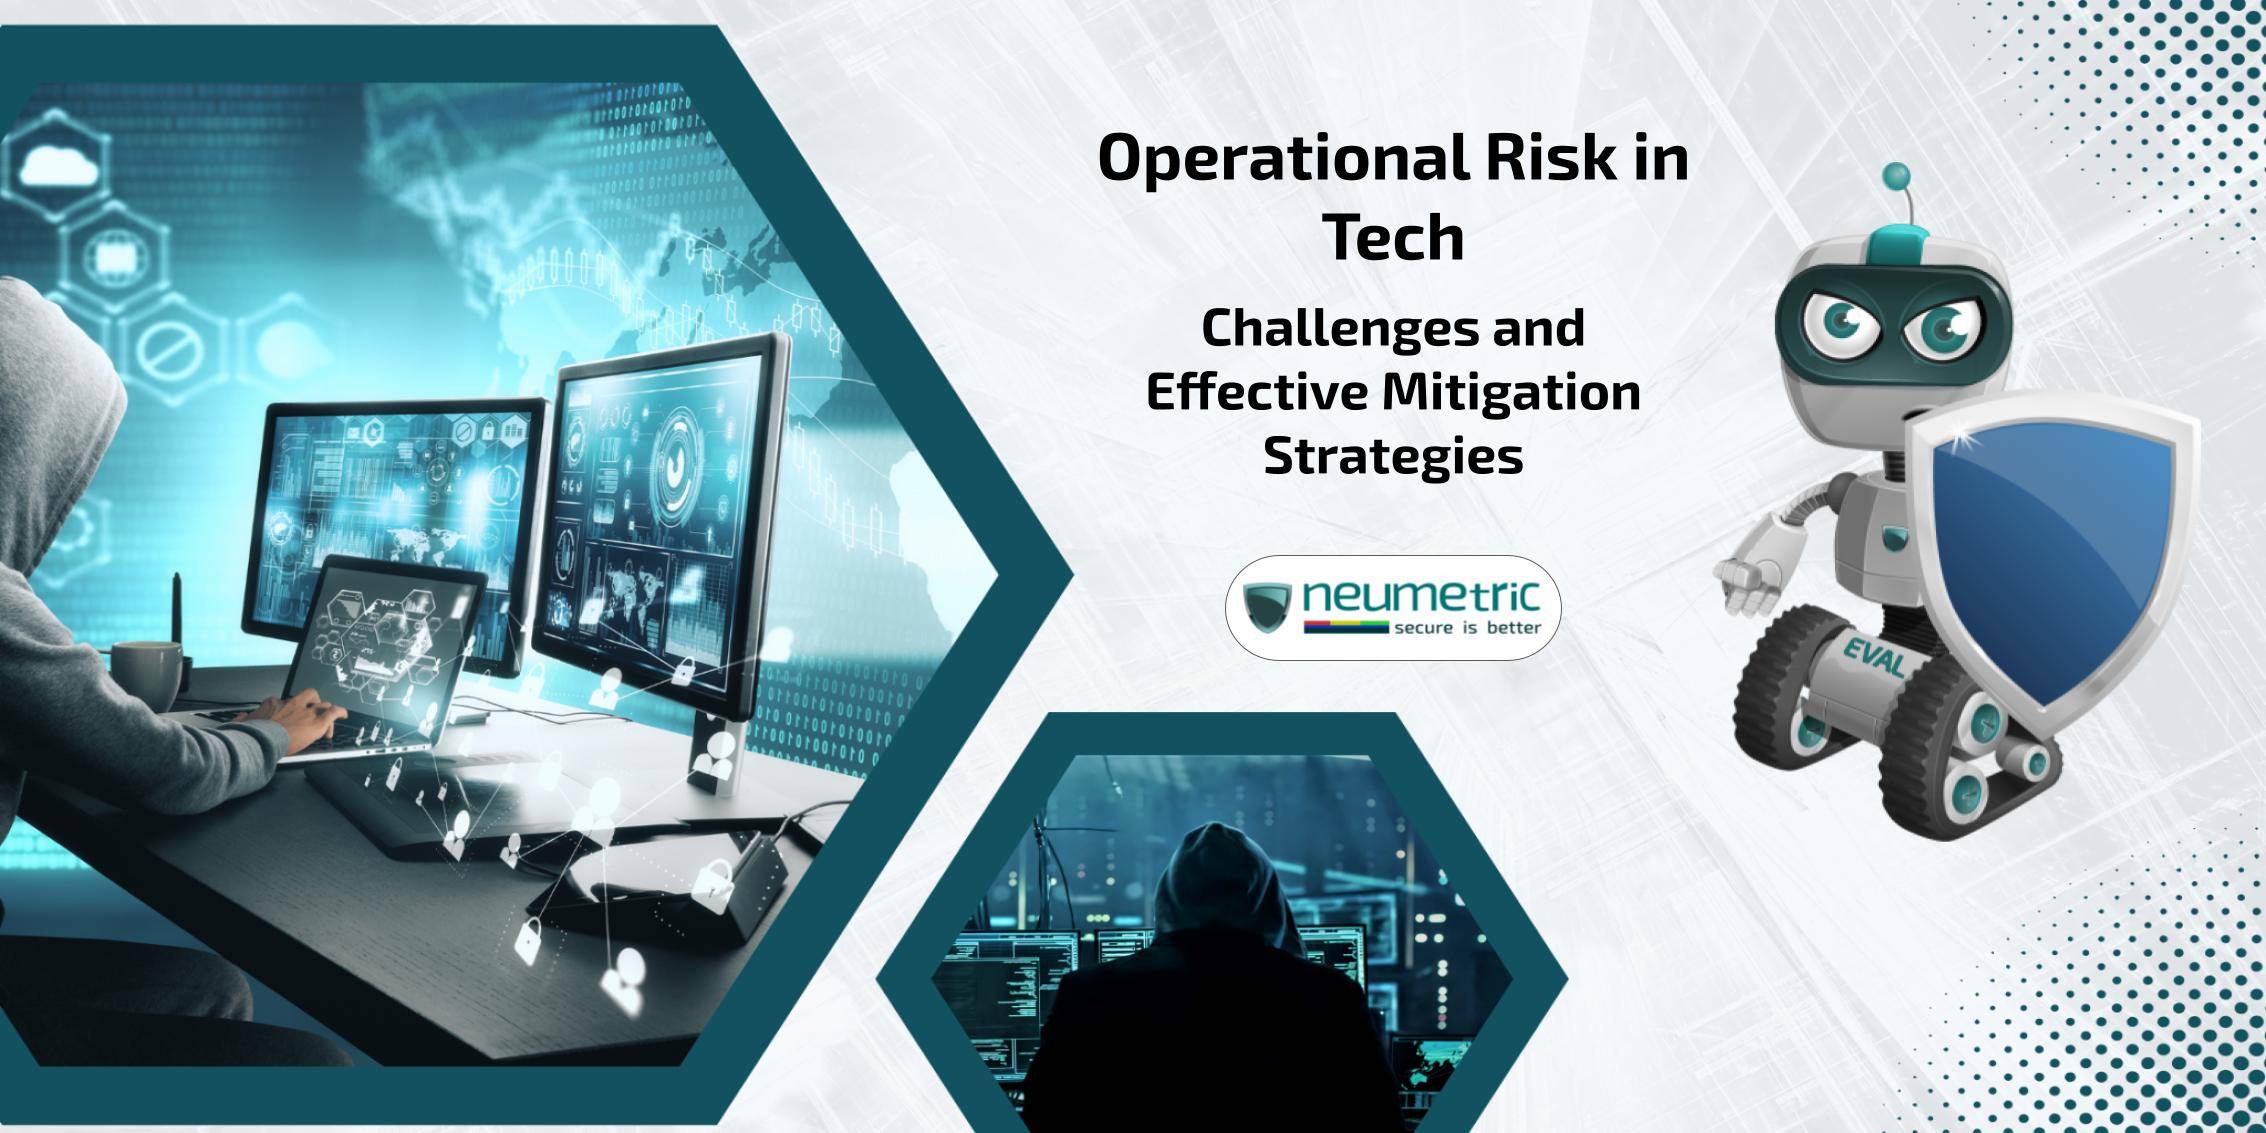 Operational Risk in Tech: Challenges & Effective Mitigation Strategies